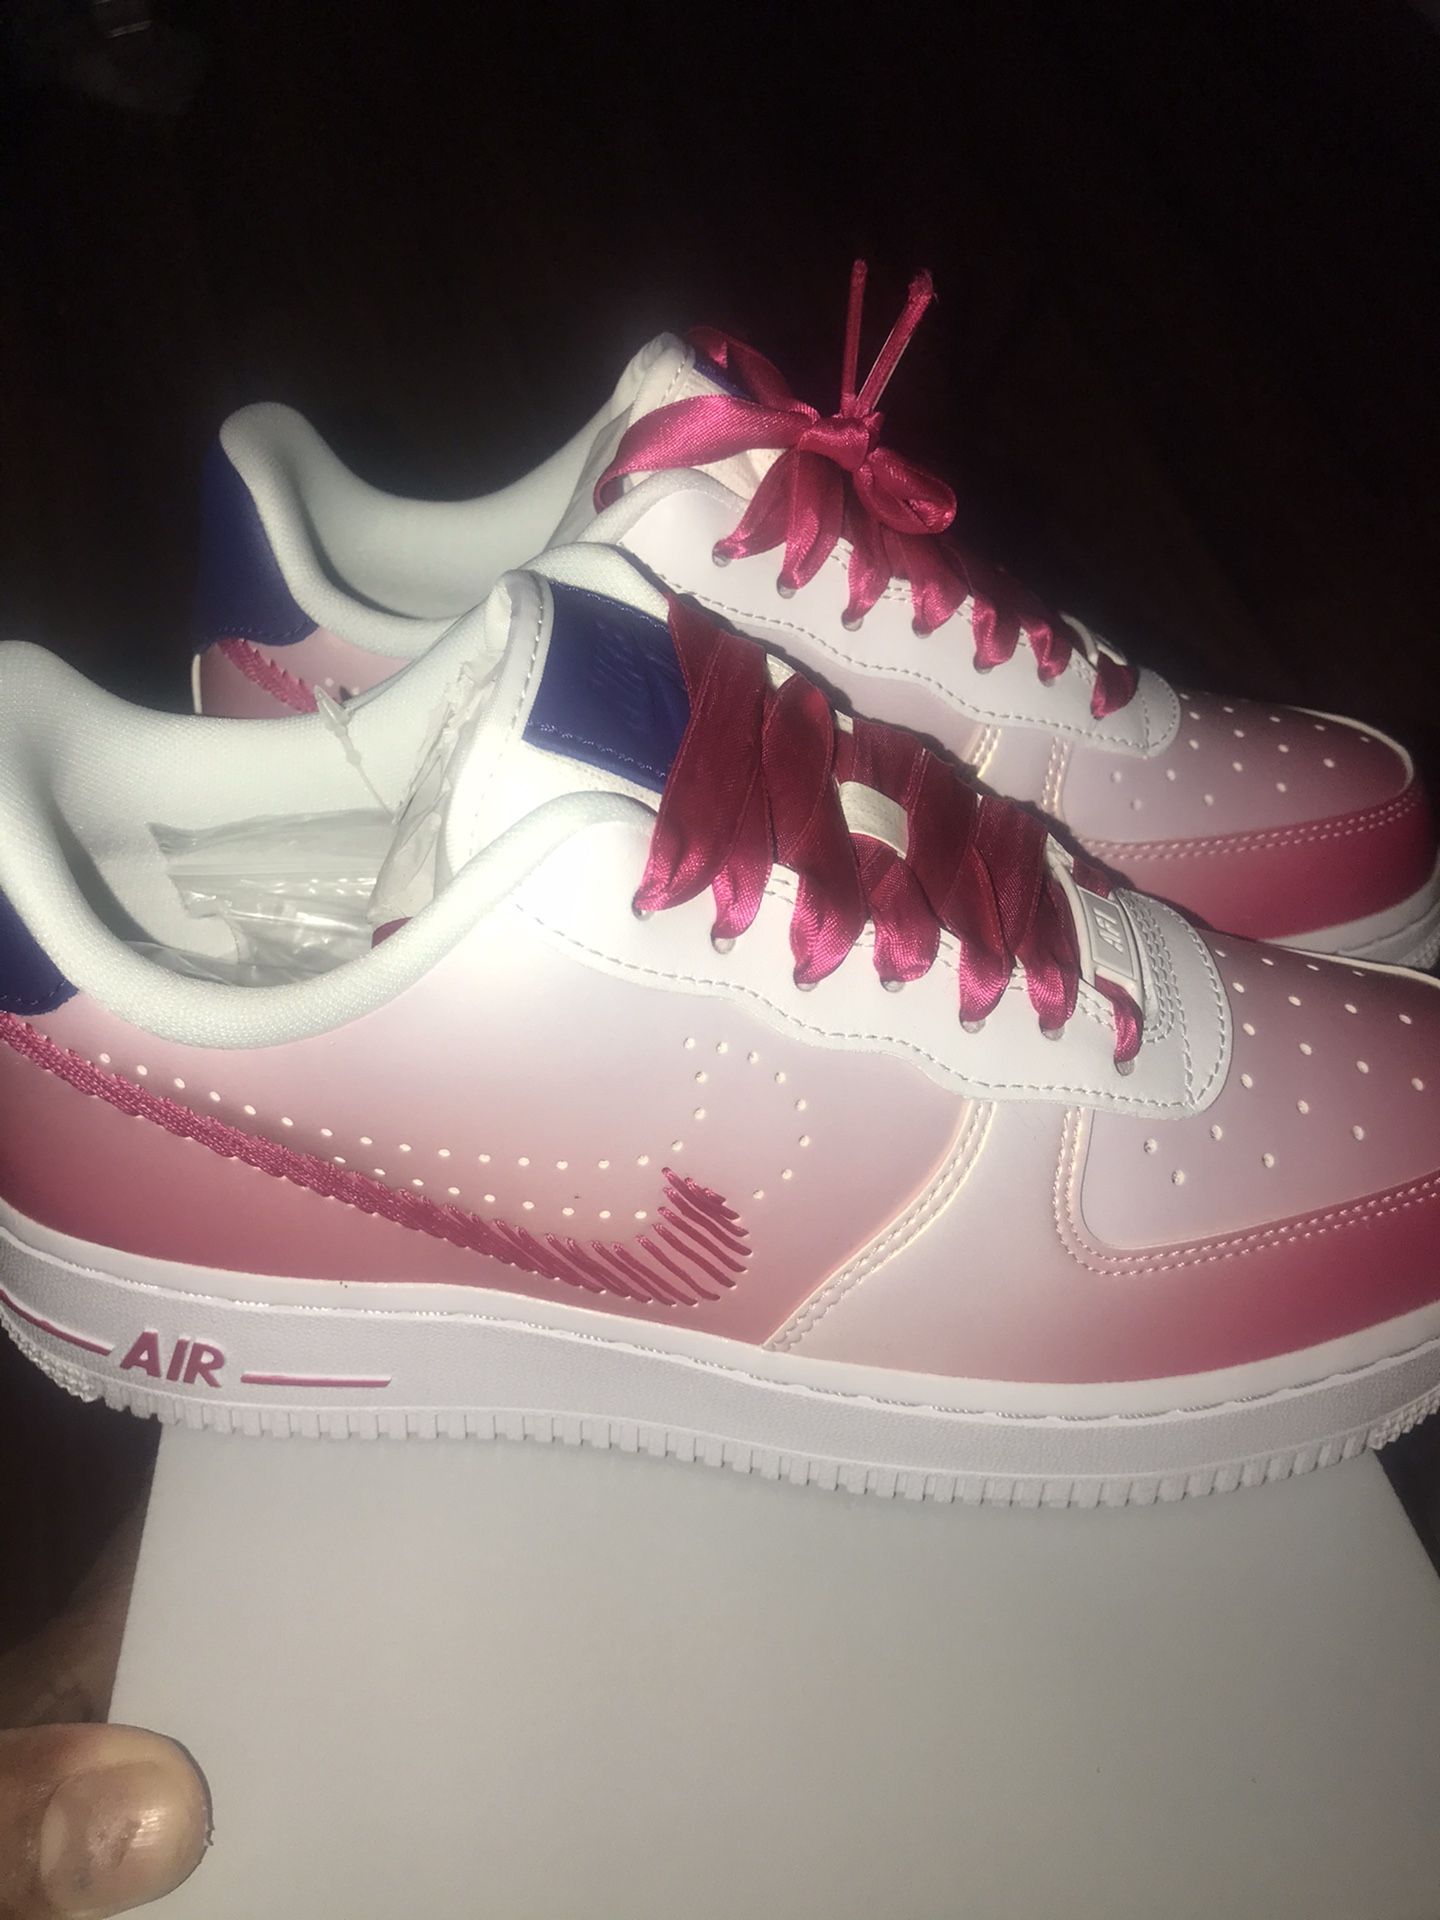 Air Force 1 “Kay yow” cancer fund. Size 6.5 women